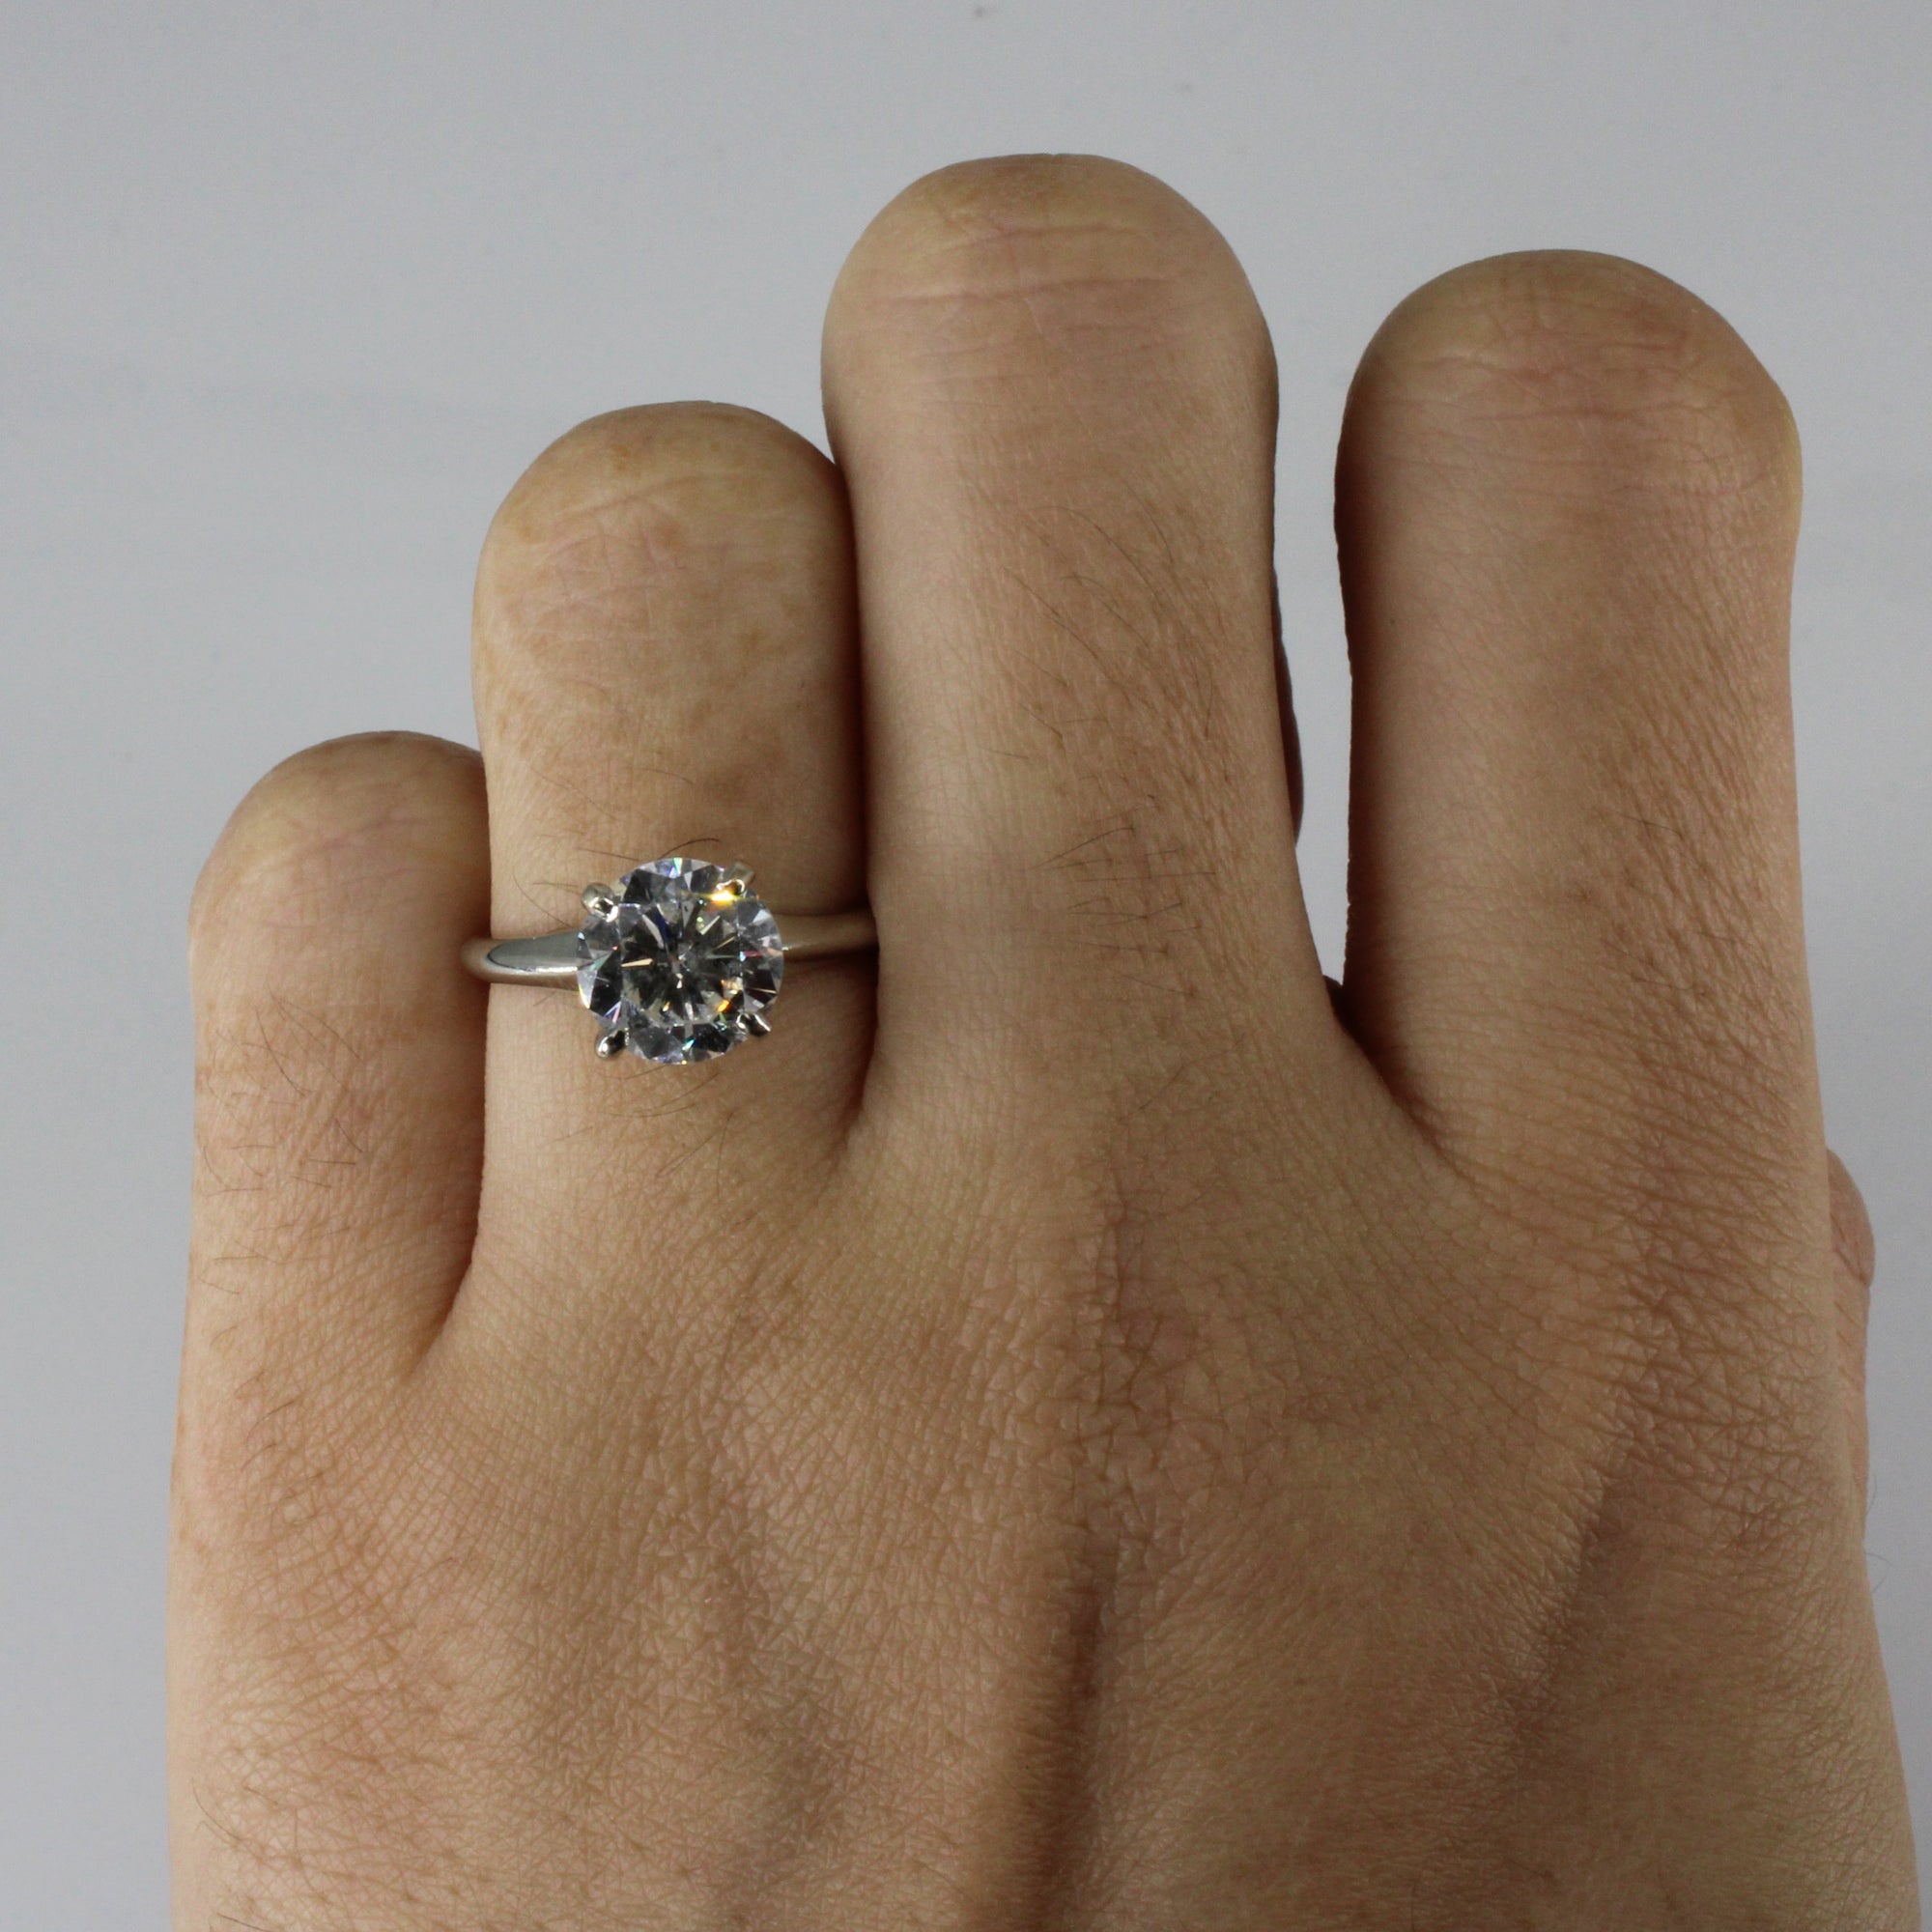 18k Solitaire Diamond Engagement Ring | 2.10ct I1/2 G/H VG | SZ 5.5 |